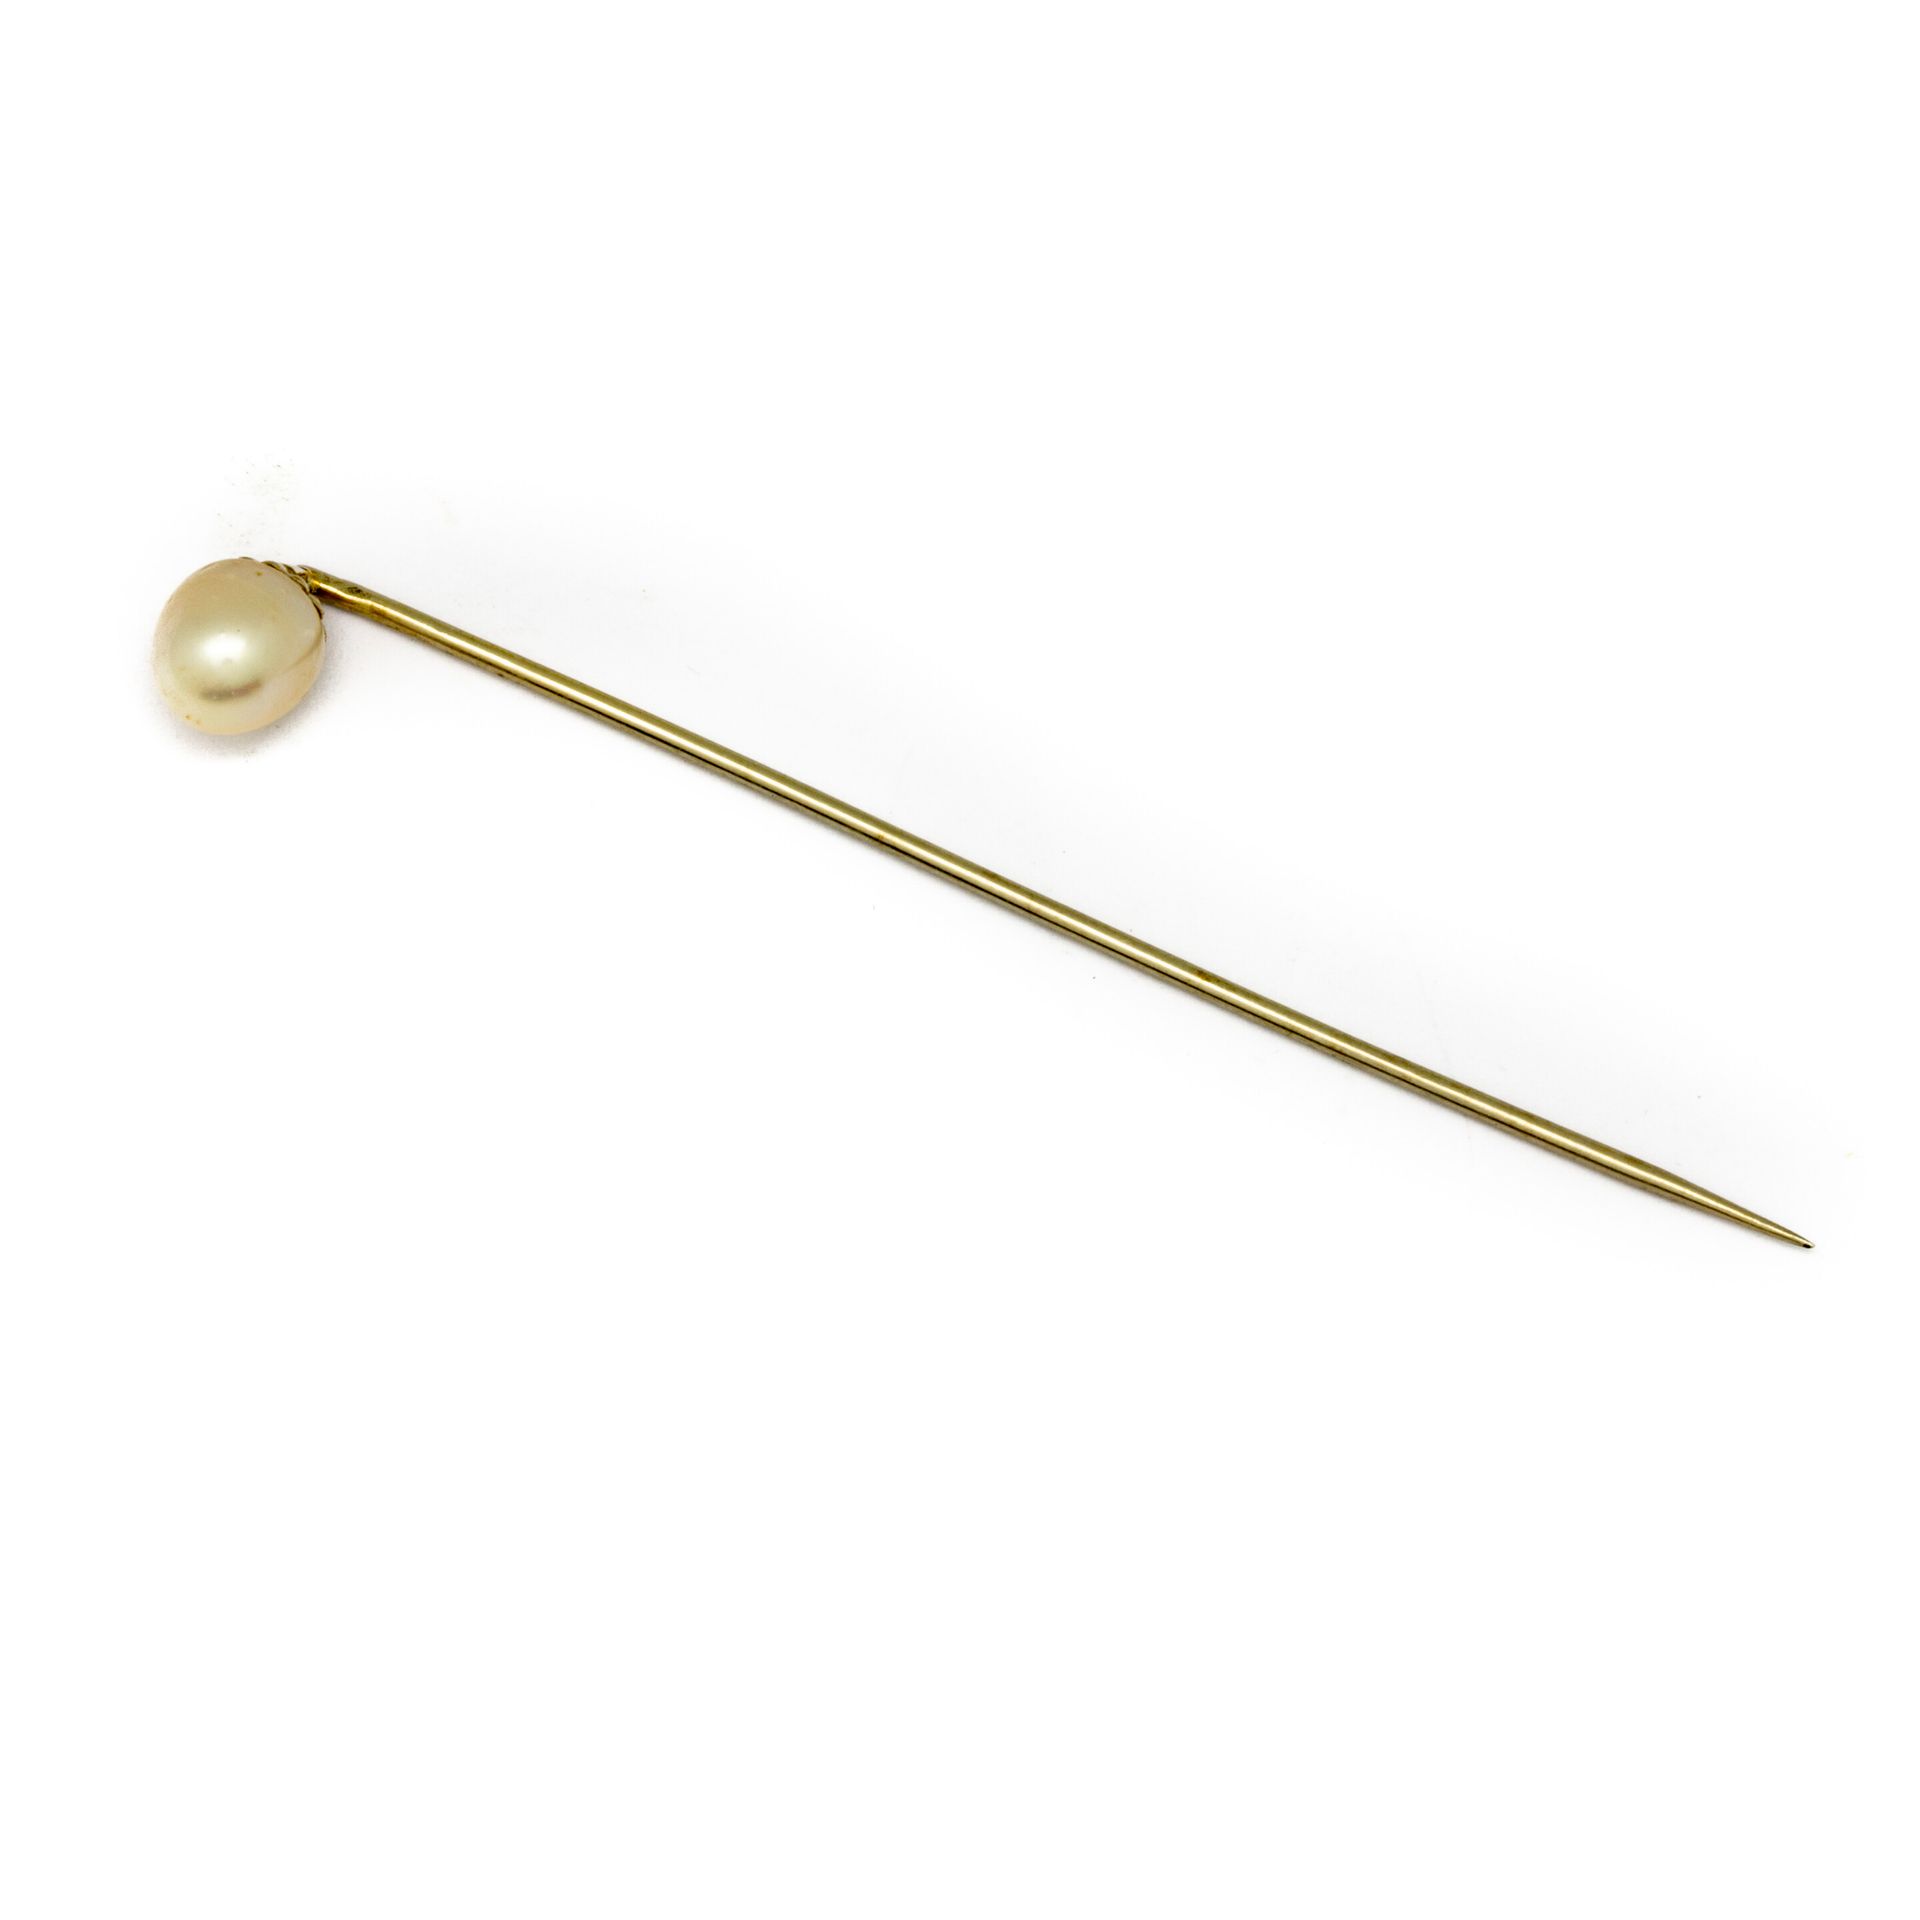 Null Gold tie pin with a pearl
Gross weight: 1,6 g.